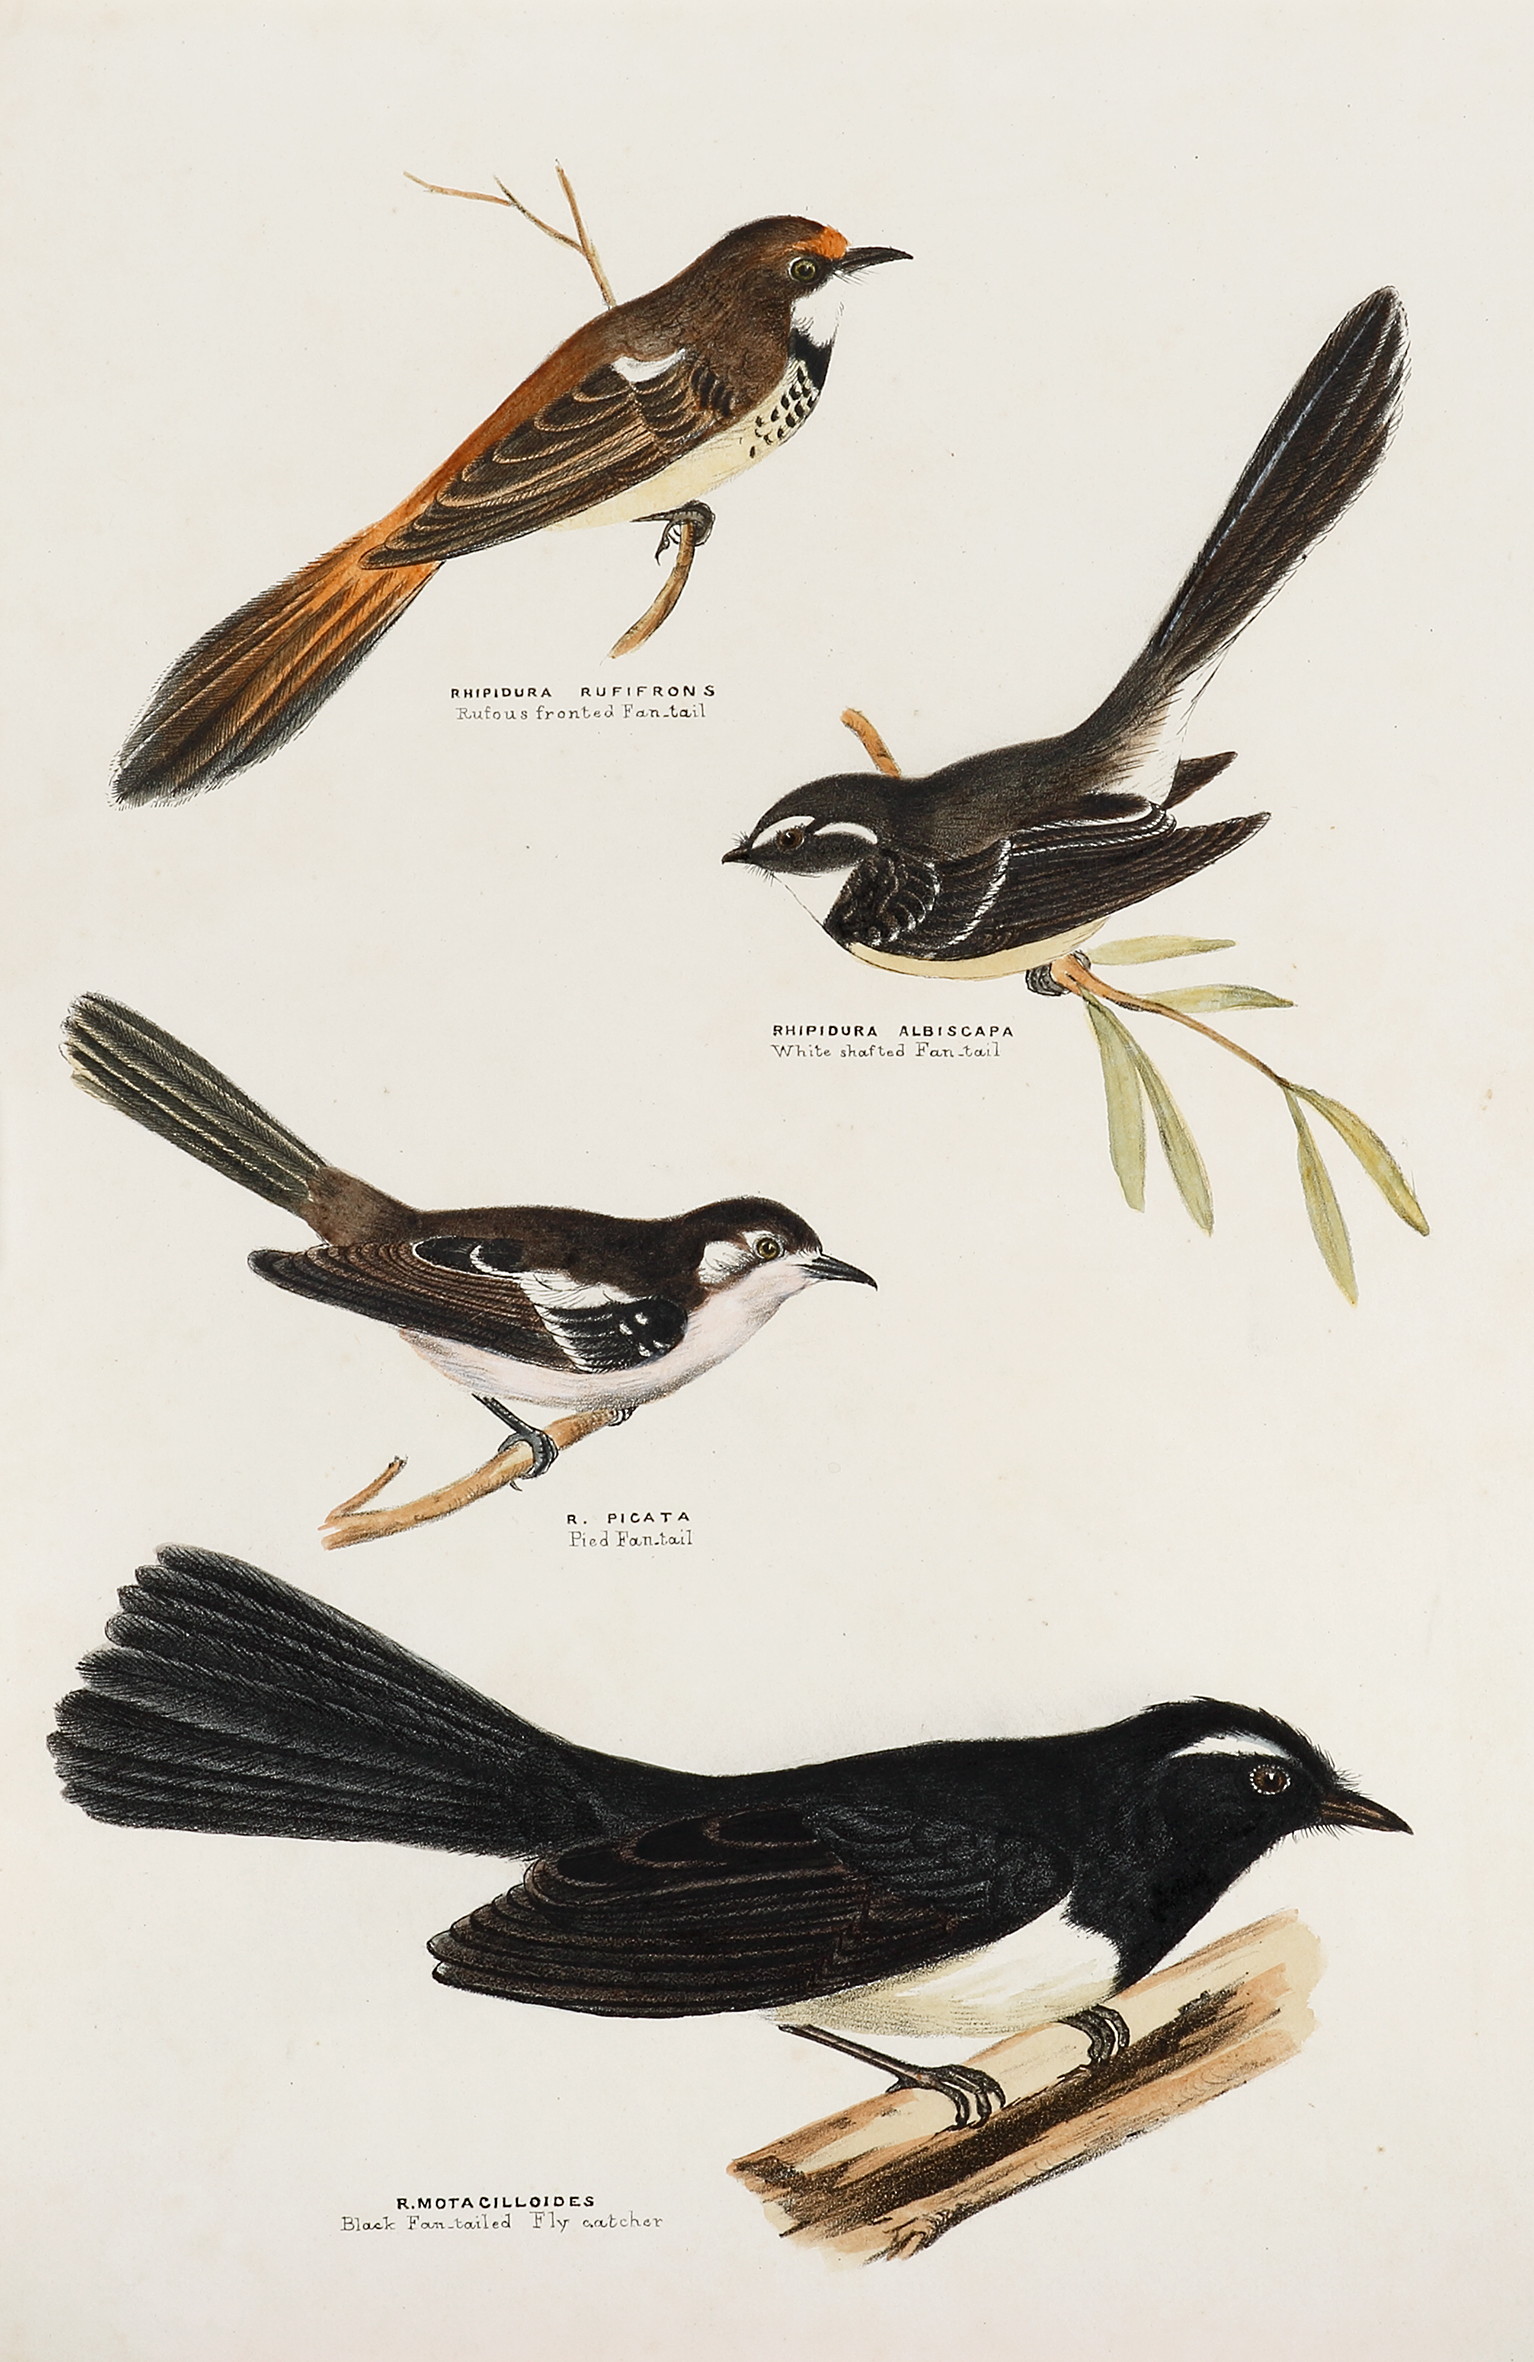 Rhipidura Rufifrons [Rufous Fronted Fan-tail], Rhipidura Albiscapa [White shafted Fan-tail], R.Picata [Pied Fan-tail], R.Motacilloides [Black Fan-tailed Fly catcher. - Antique Print from 1866